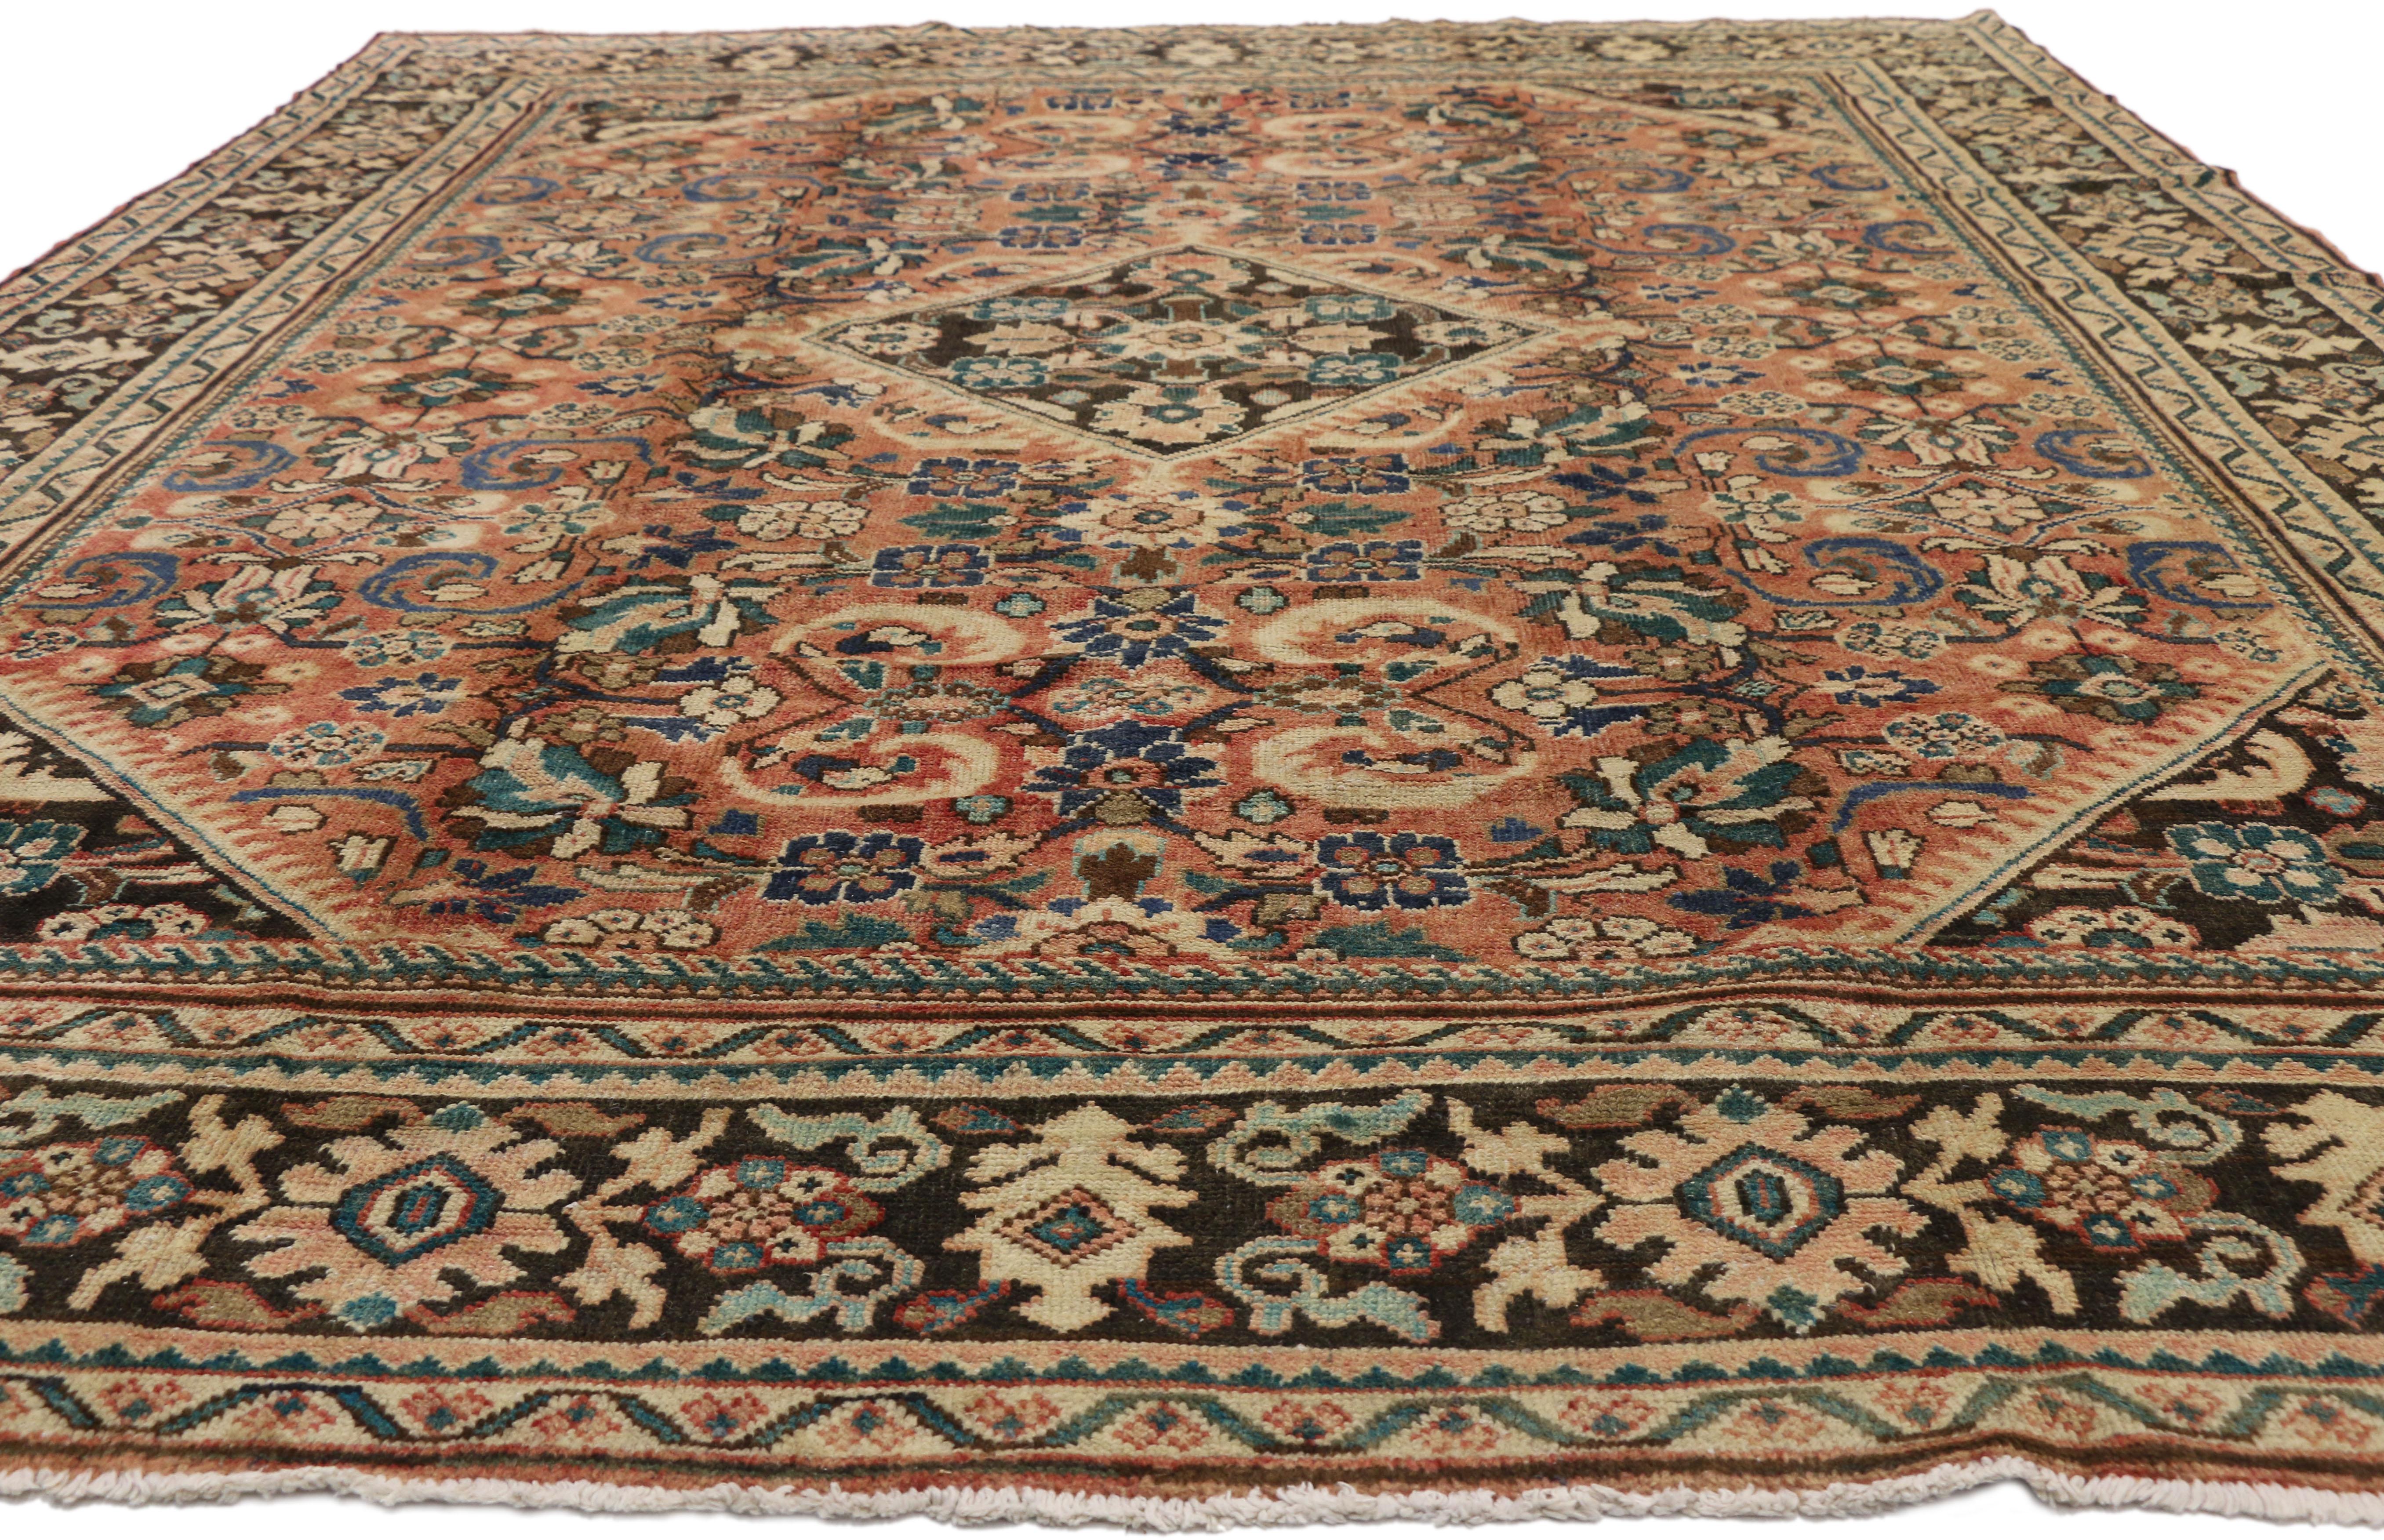 Arts and Crafts Antique Persian Mahal Rug with Arts & Crafts Style